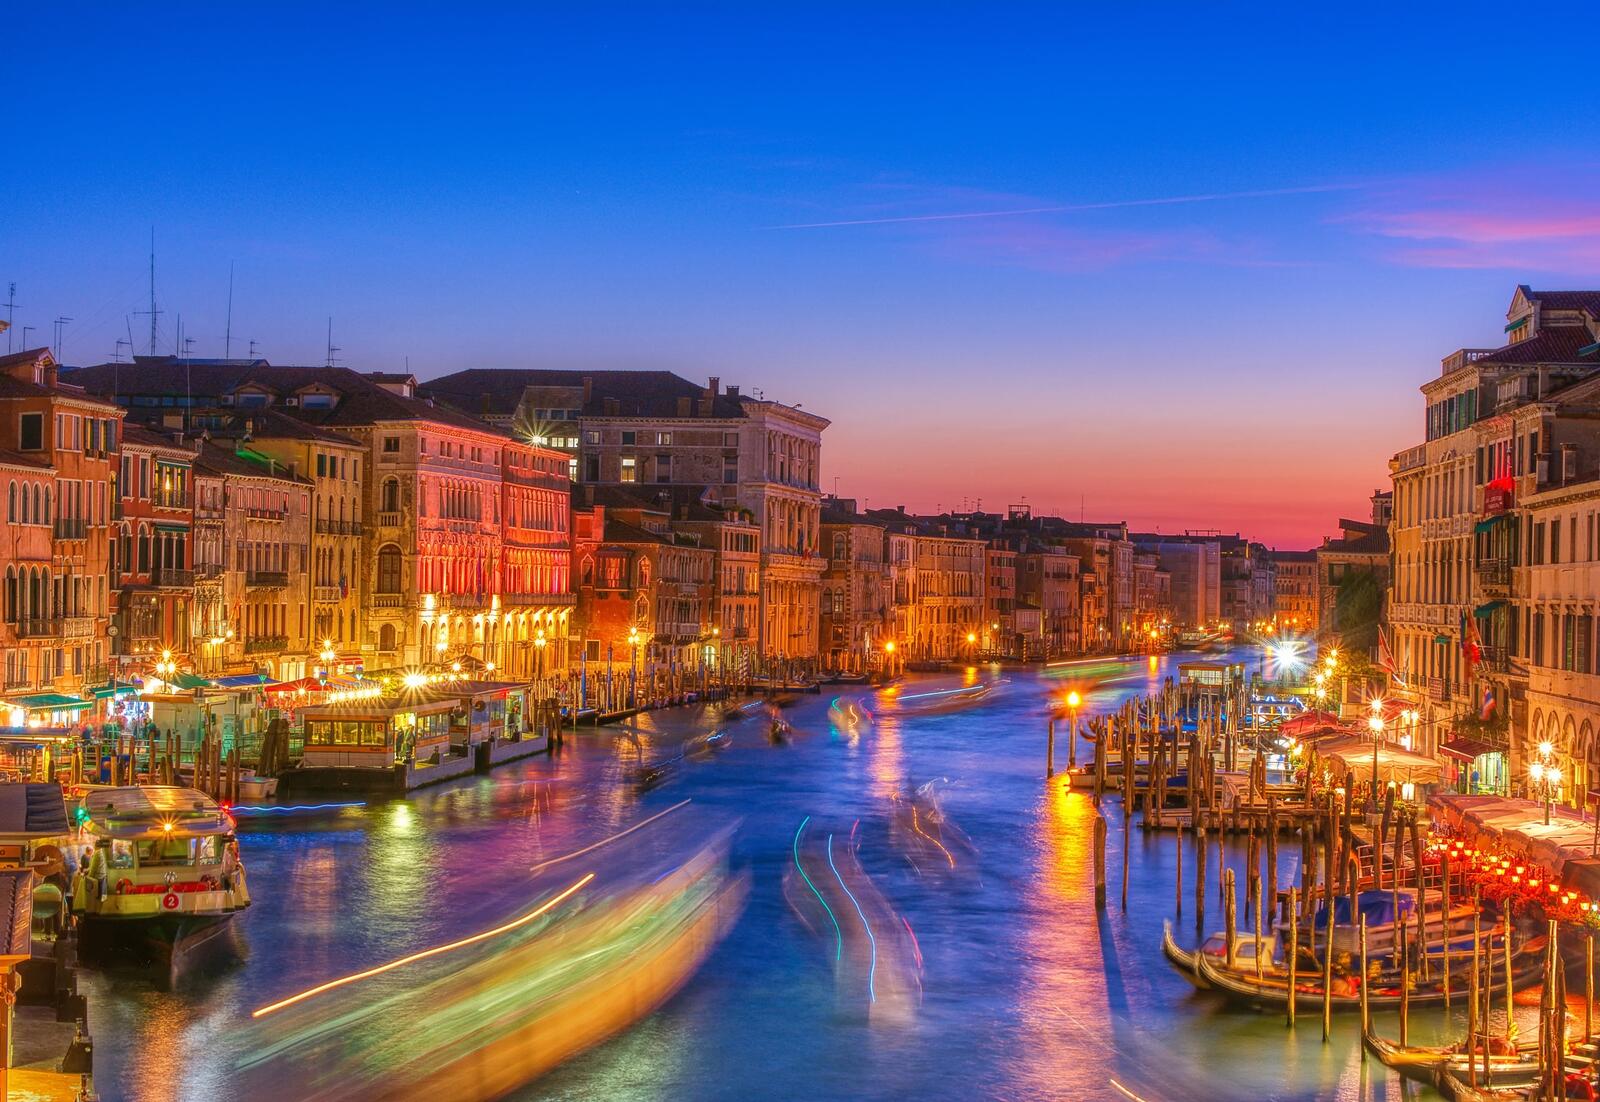 Wallpapers Grand canal sunset Venice Italy on the desktop